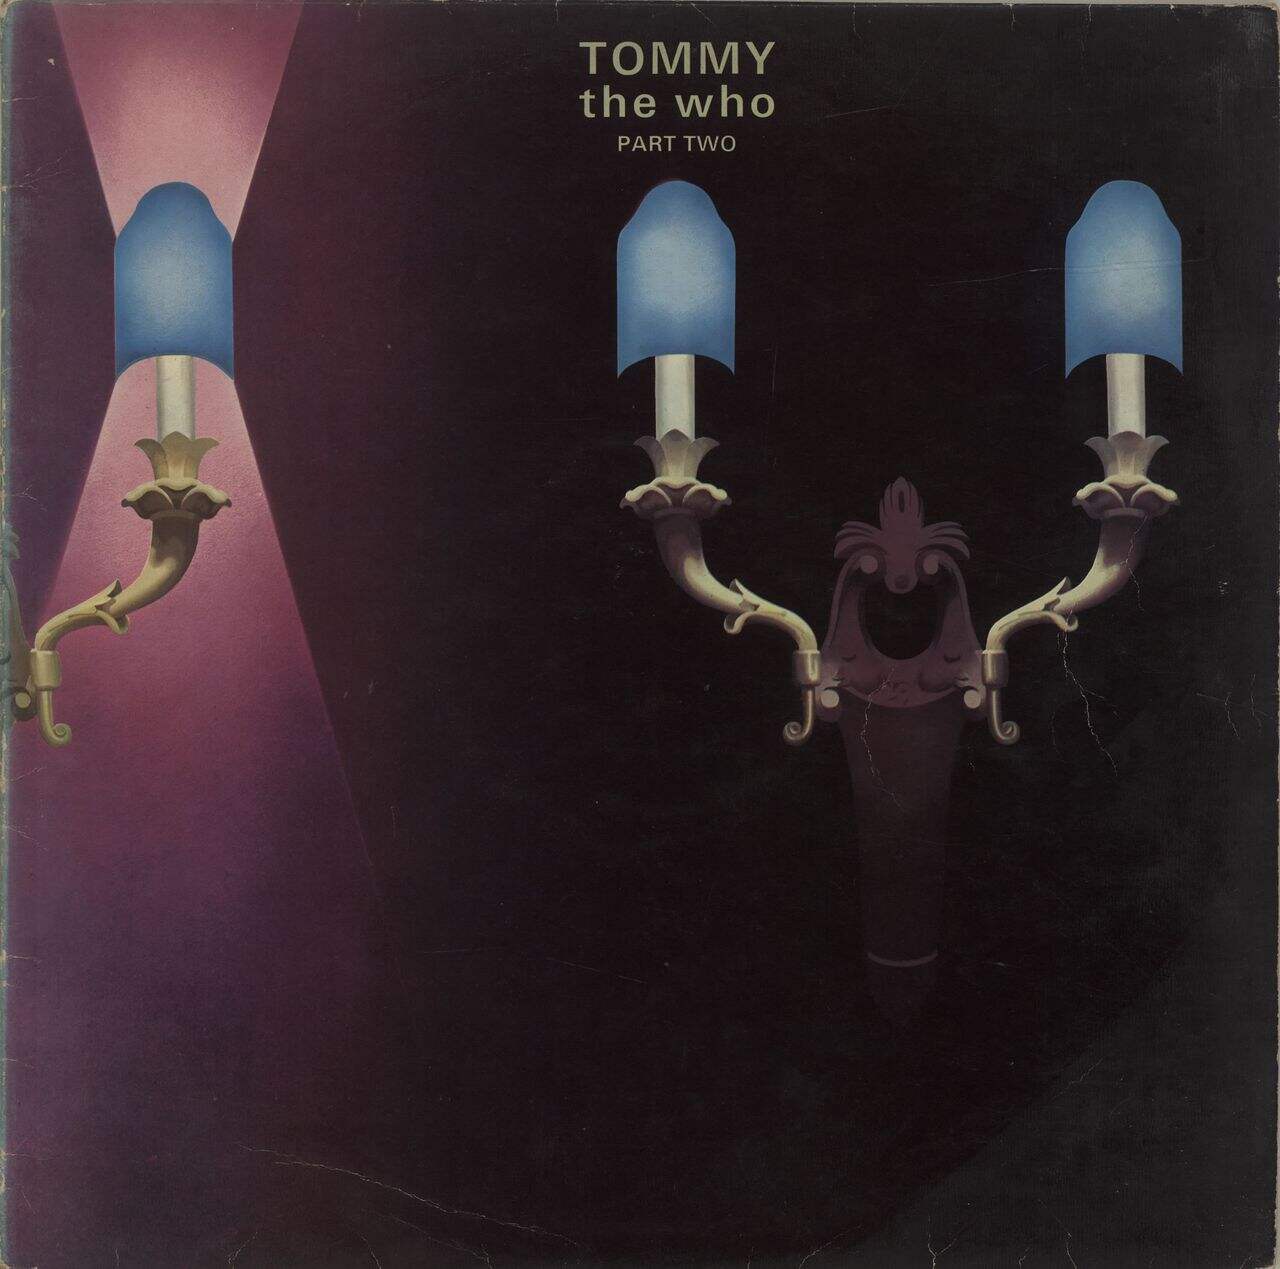 The Who Tommy - Parts One & Two UK 2-LP vinyl set